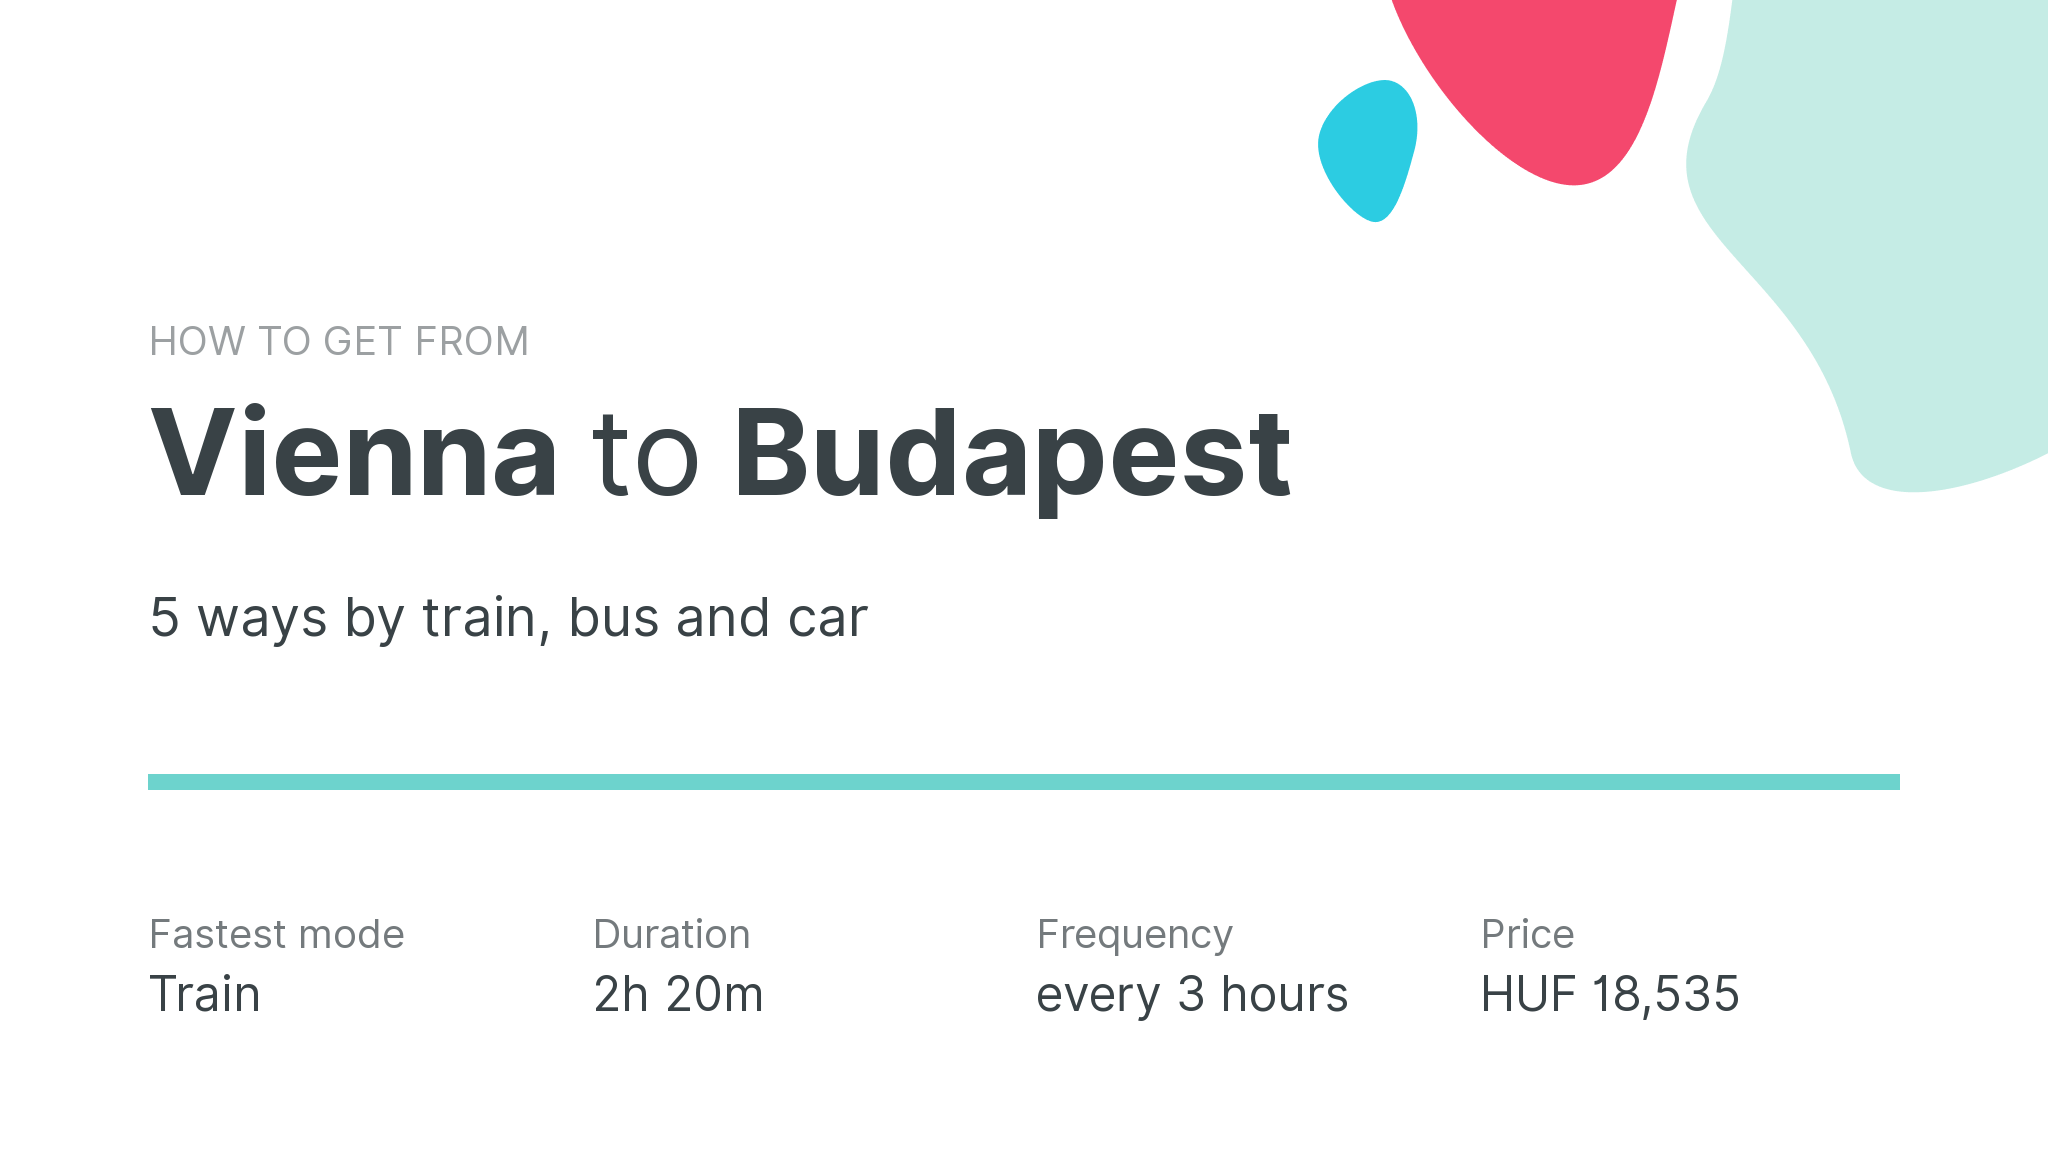 How do I get from Vienna to Budapest